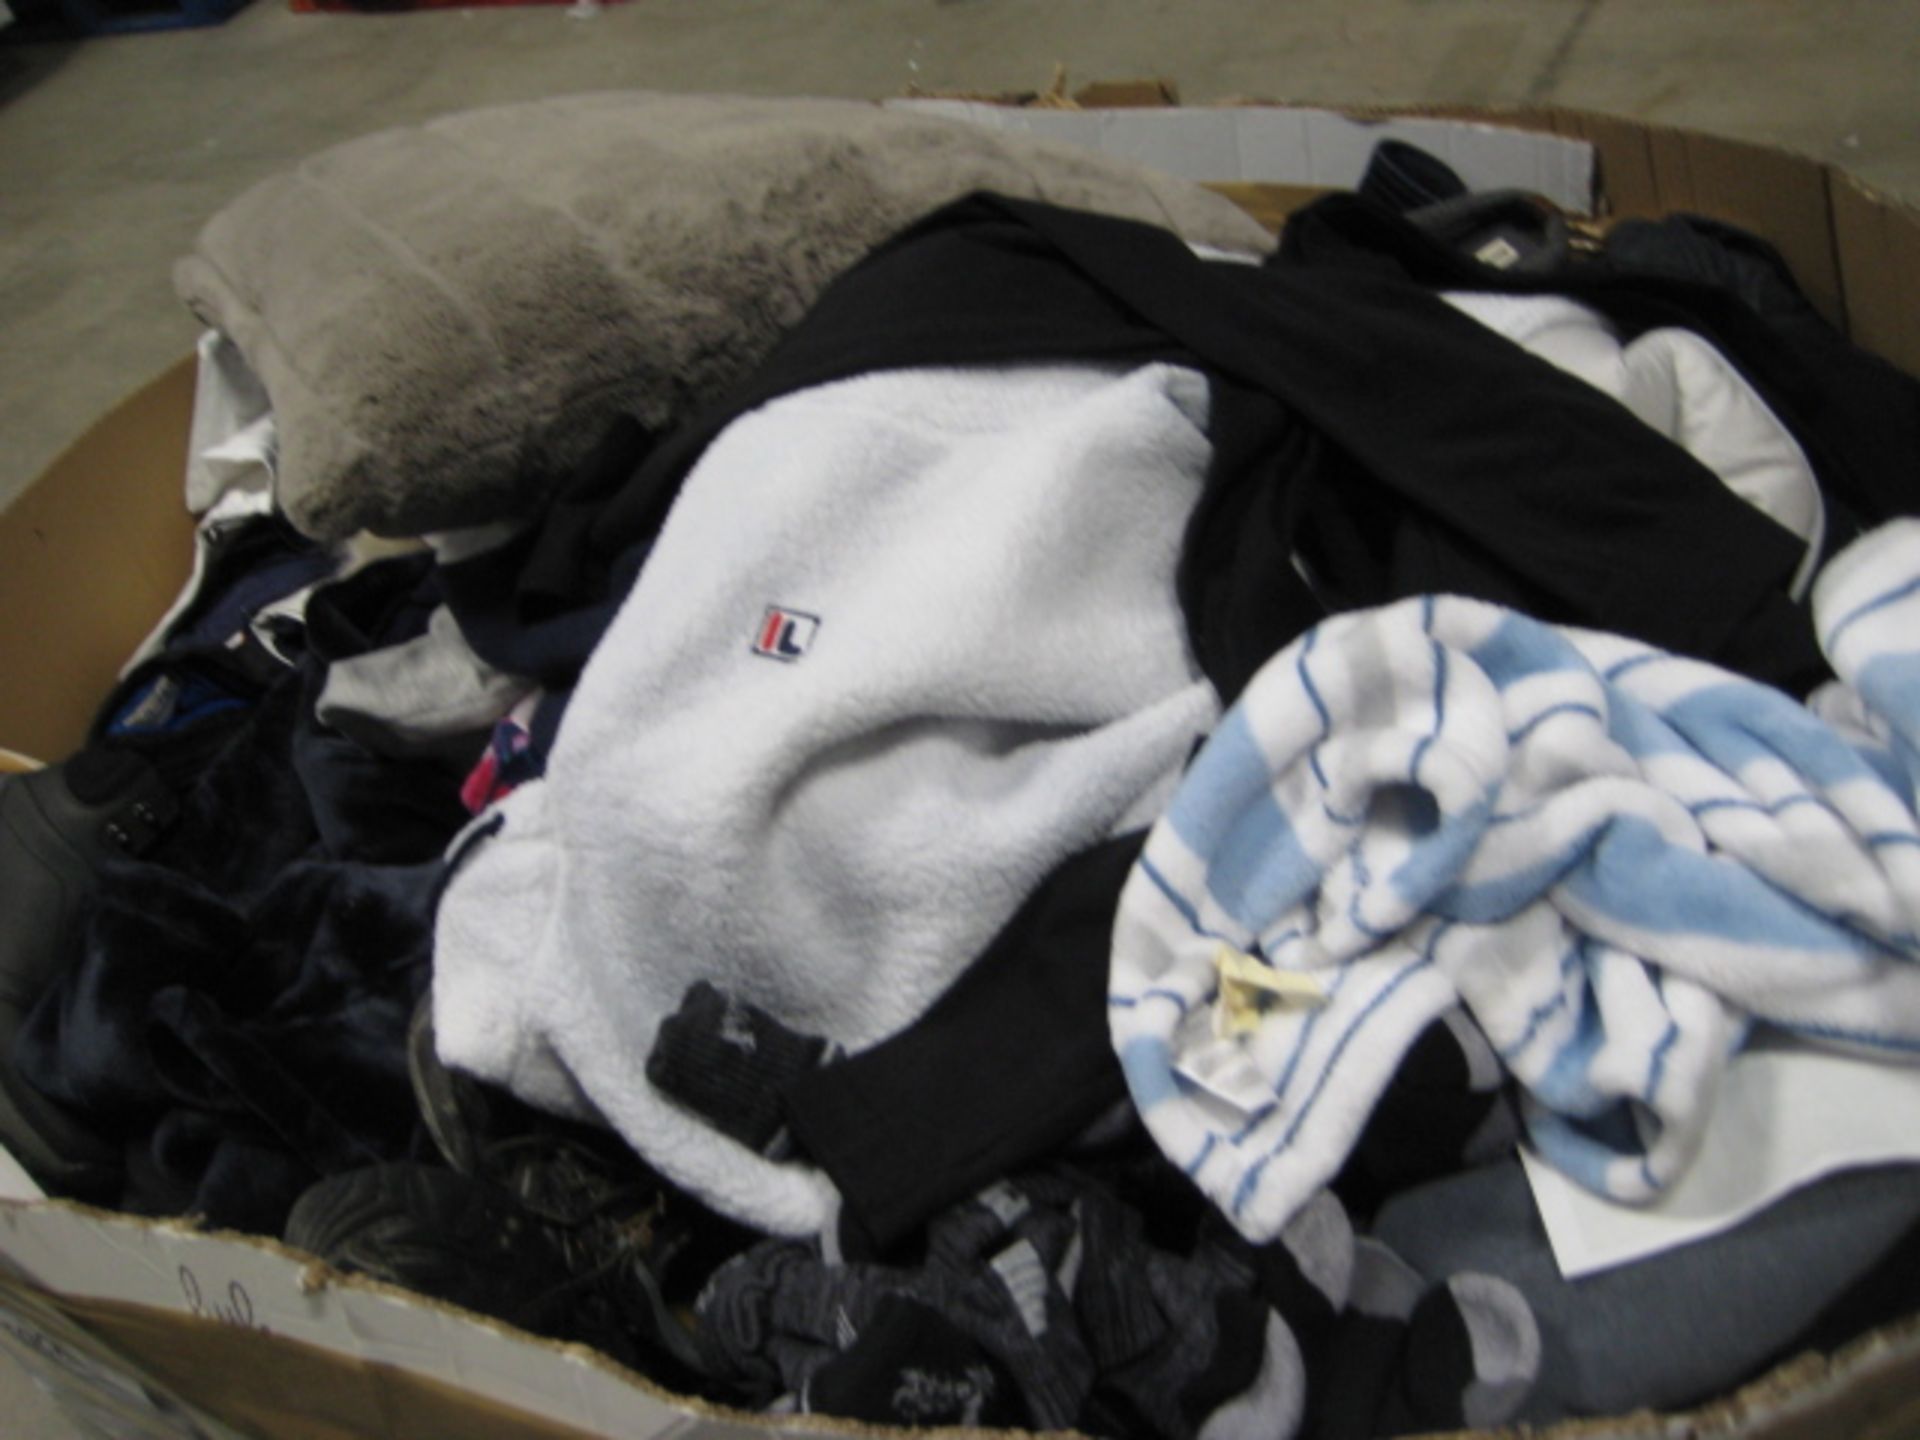 Pallet of used second hand clothing, linen, both odd and used shoes, etc.